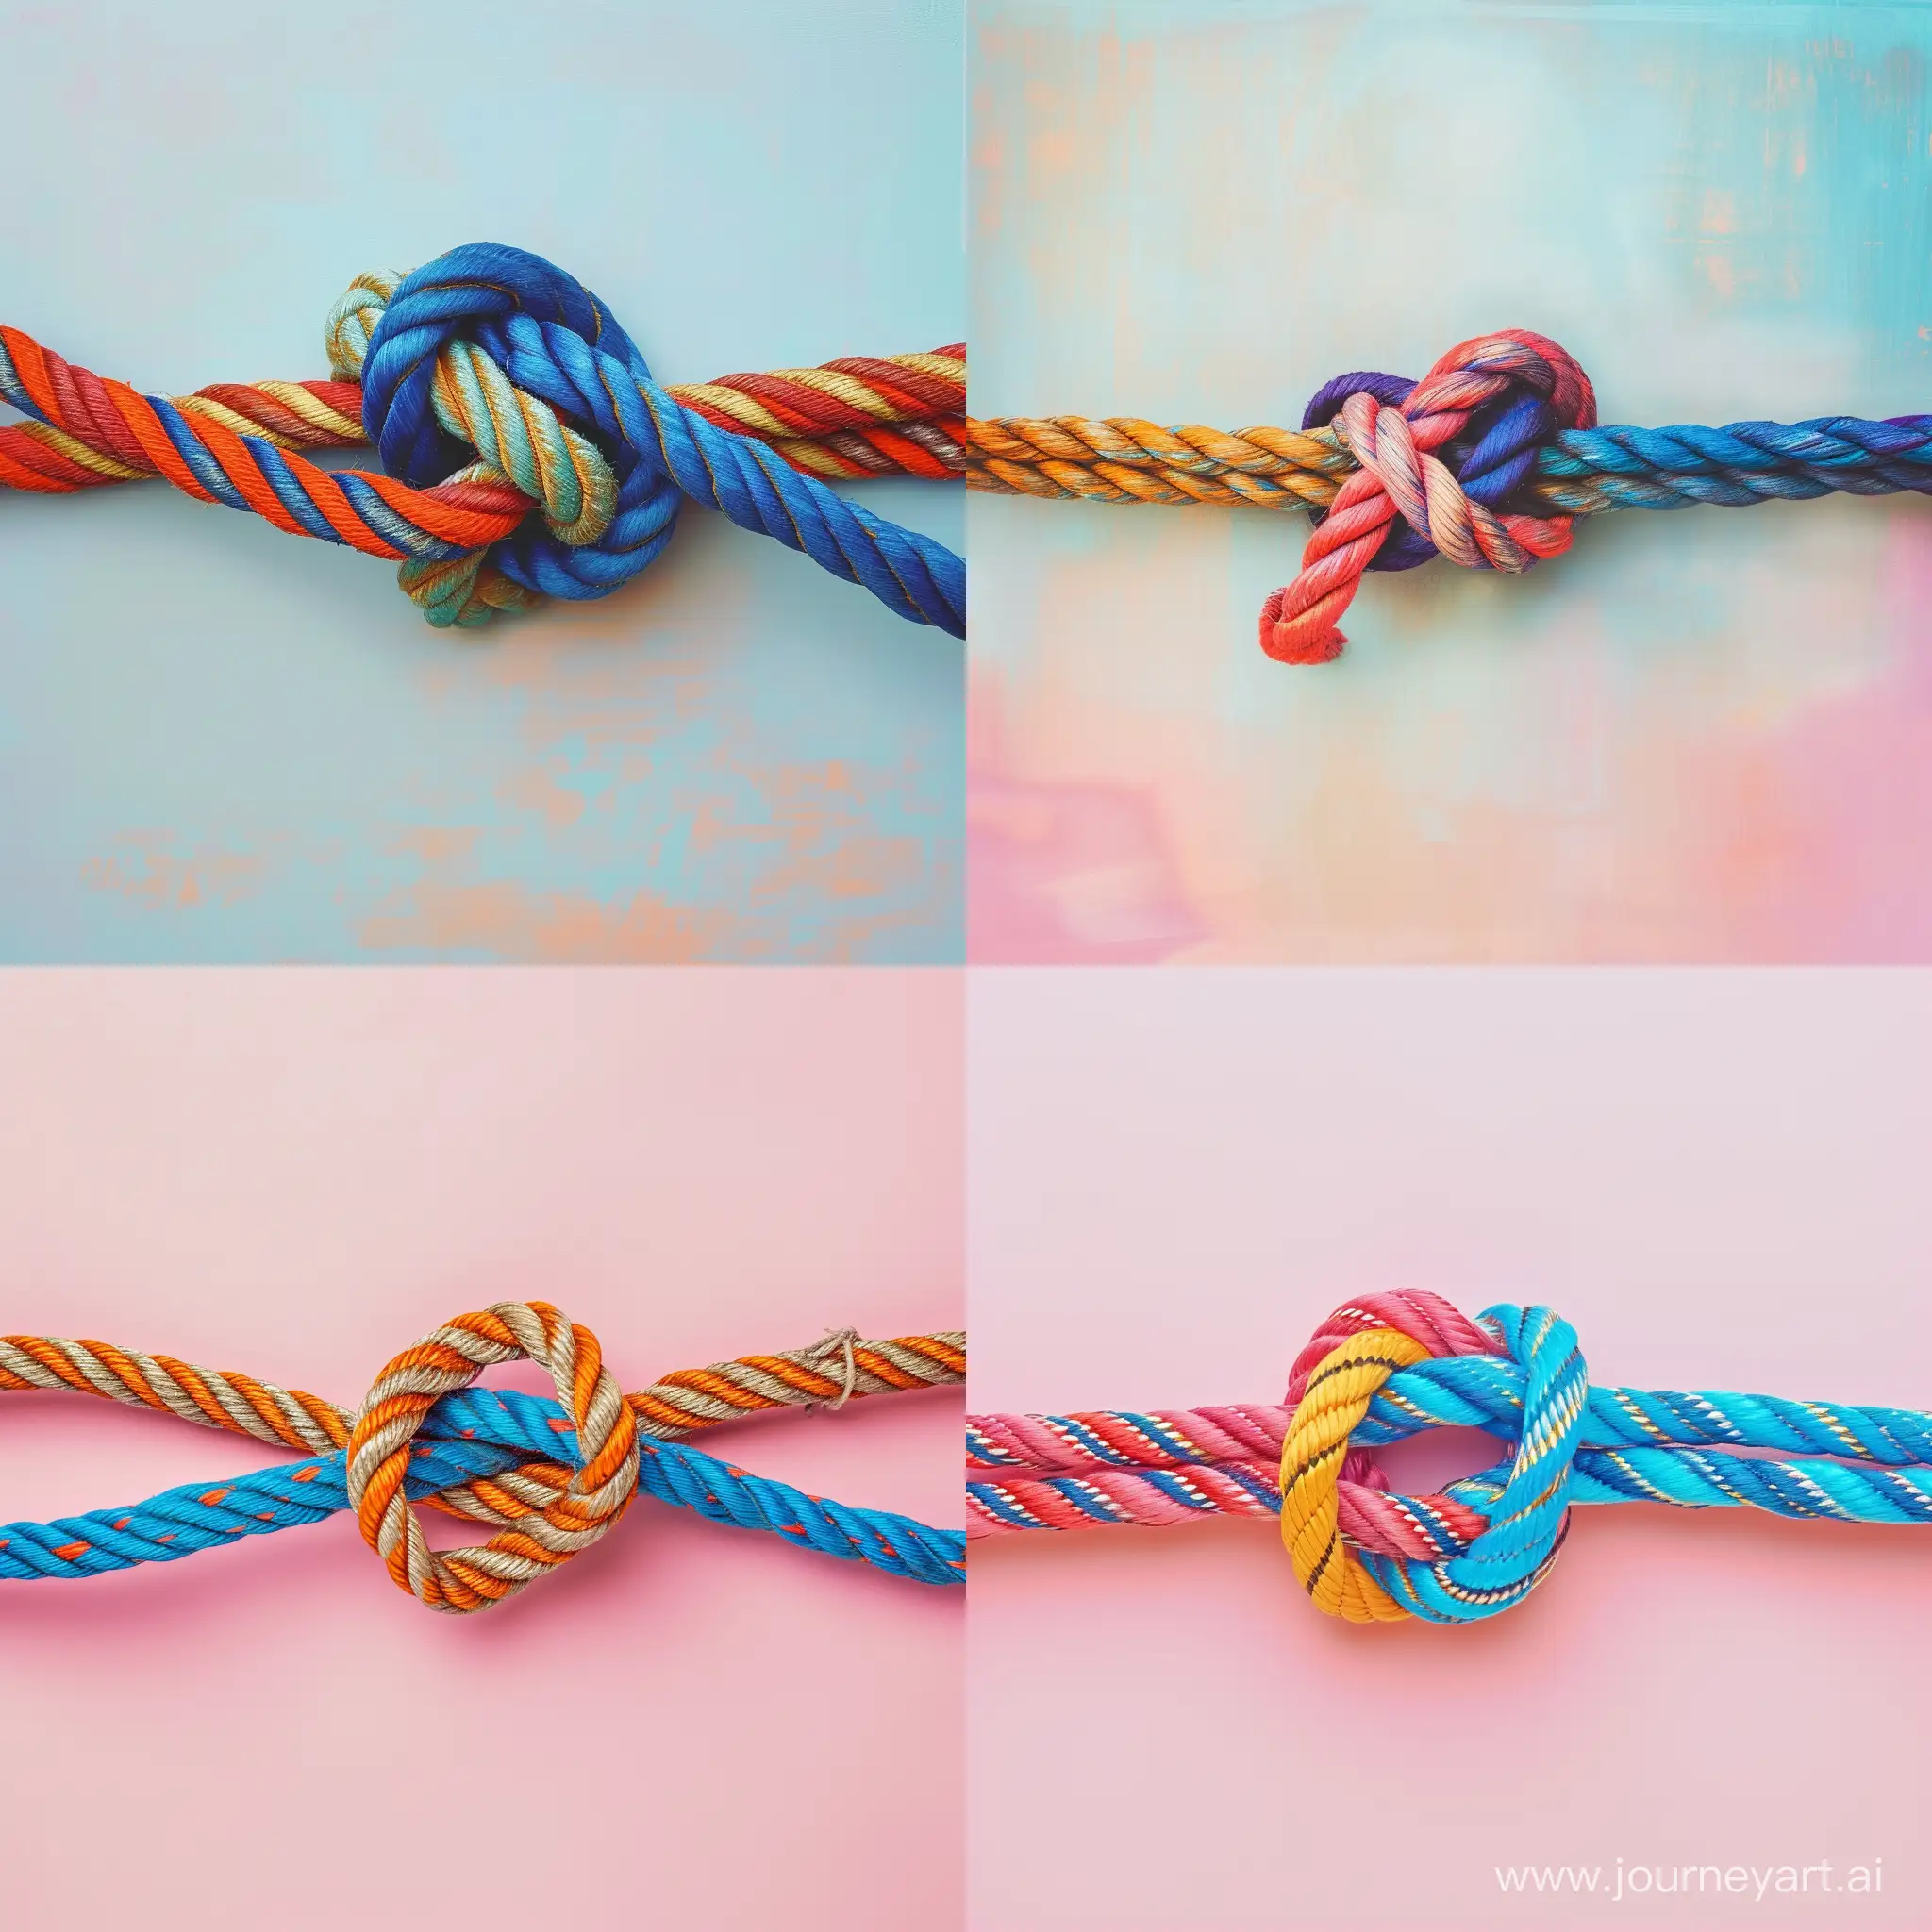 two ropes of different colors tied into a knot on light pastel background